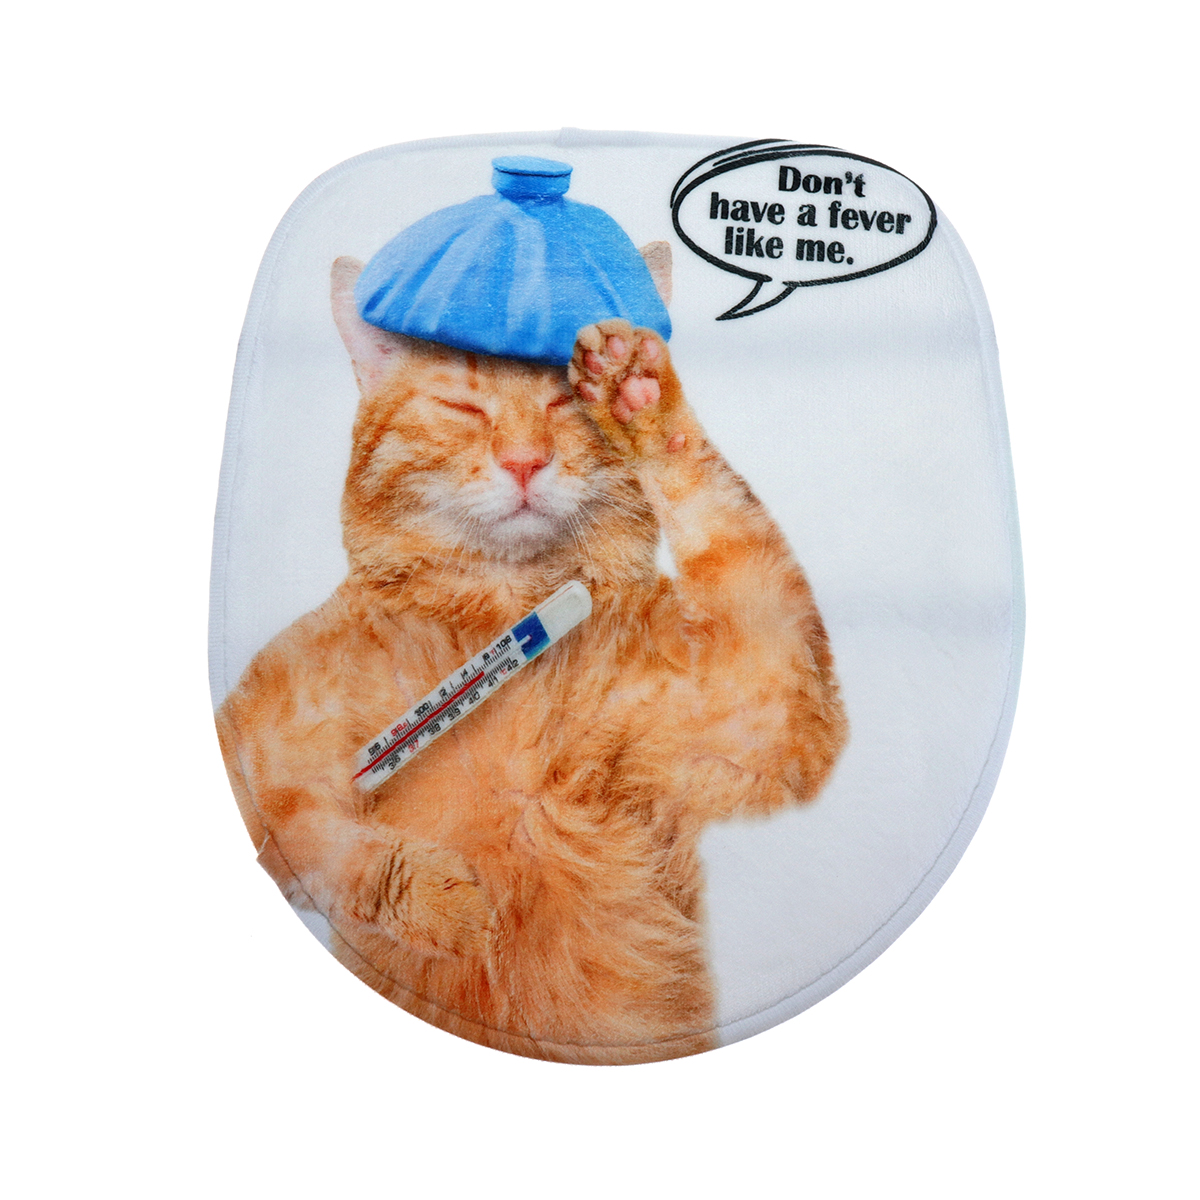 Toilet-Seat-Covers-Bathroom-Non-Slip-Thermometer-Fat-Cat-Pedestal-Rugs-Lid-Toilet-Covers-Bath-Mats-1411646-10